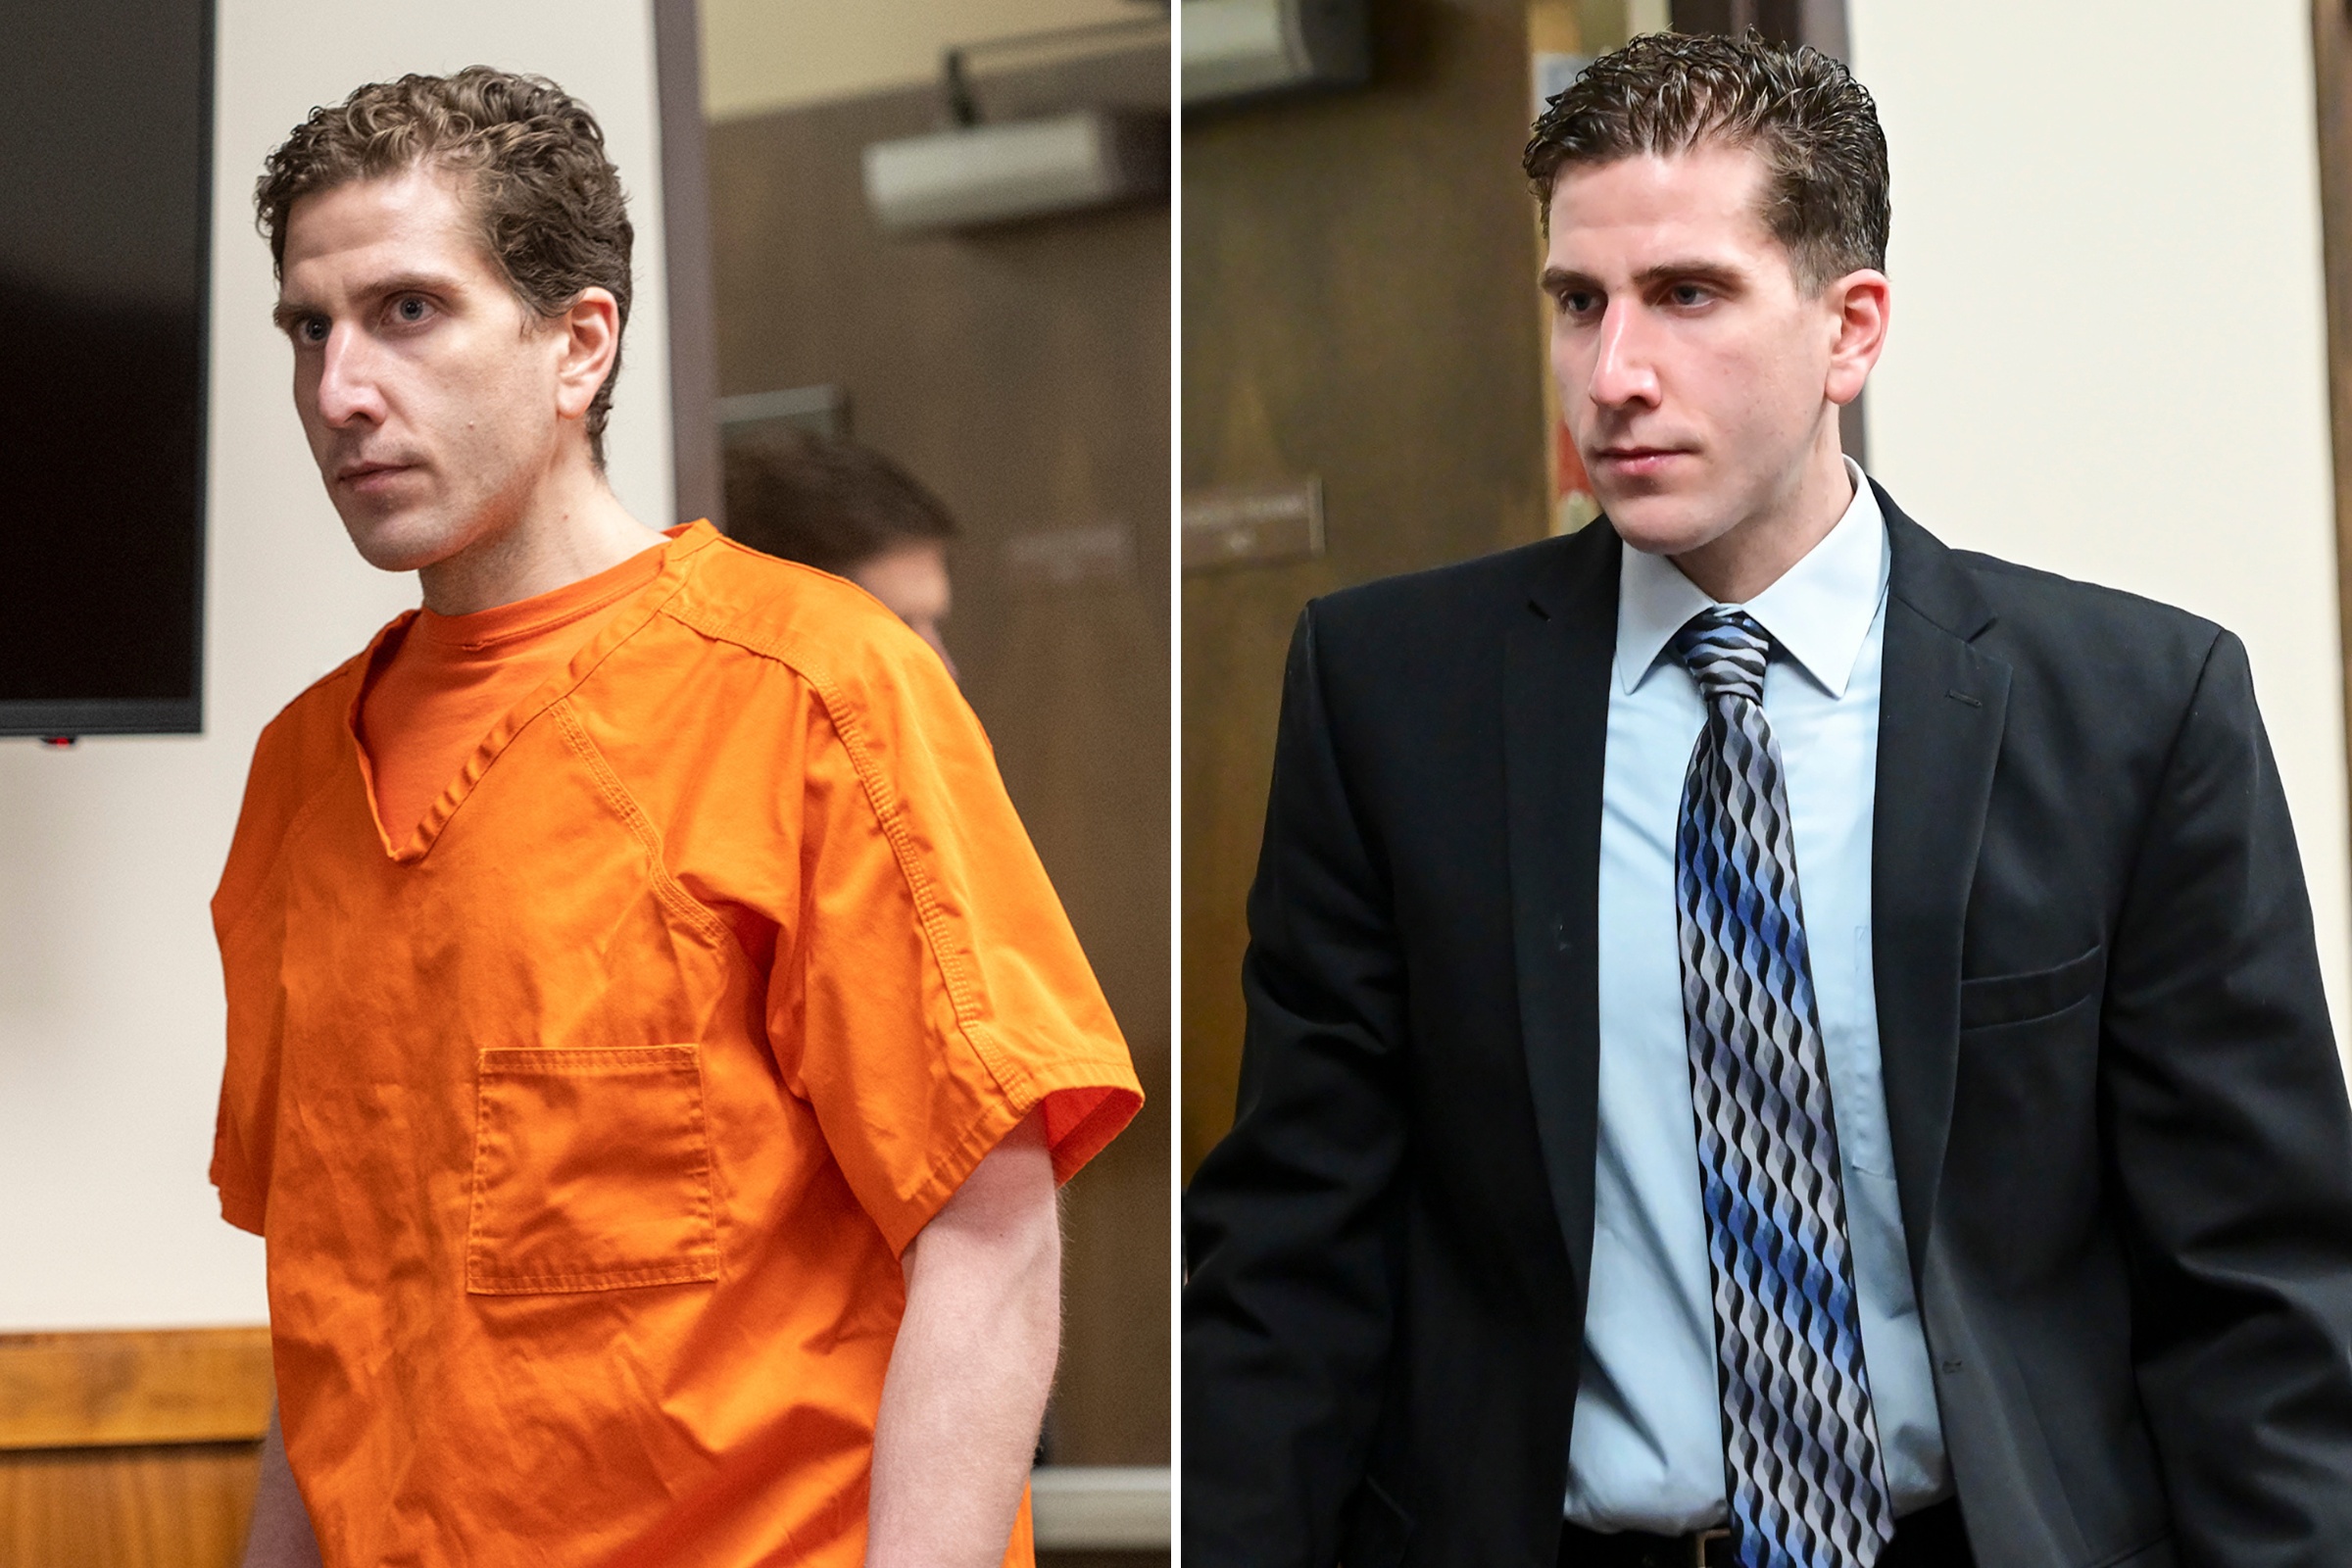 Bryan Kohberger’s court hearing shows striking difference in appearance